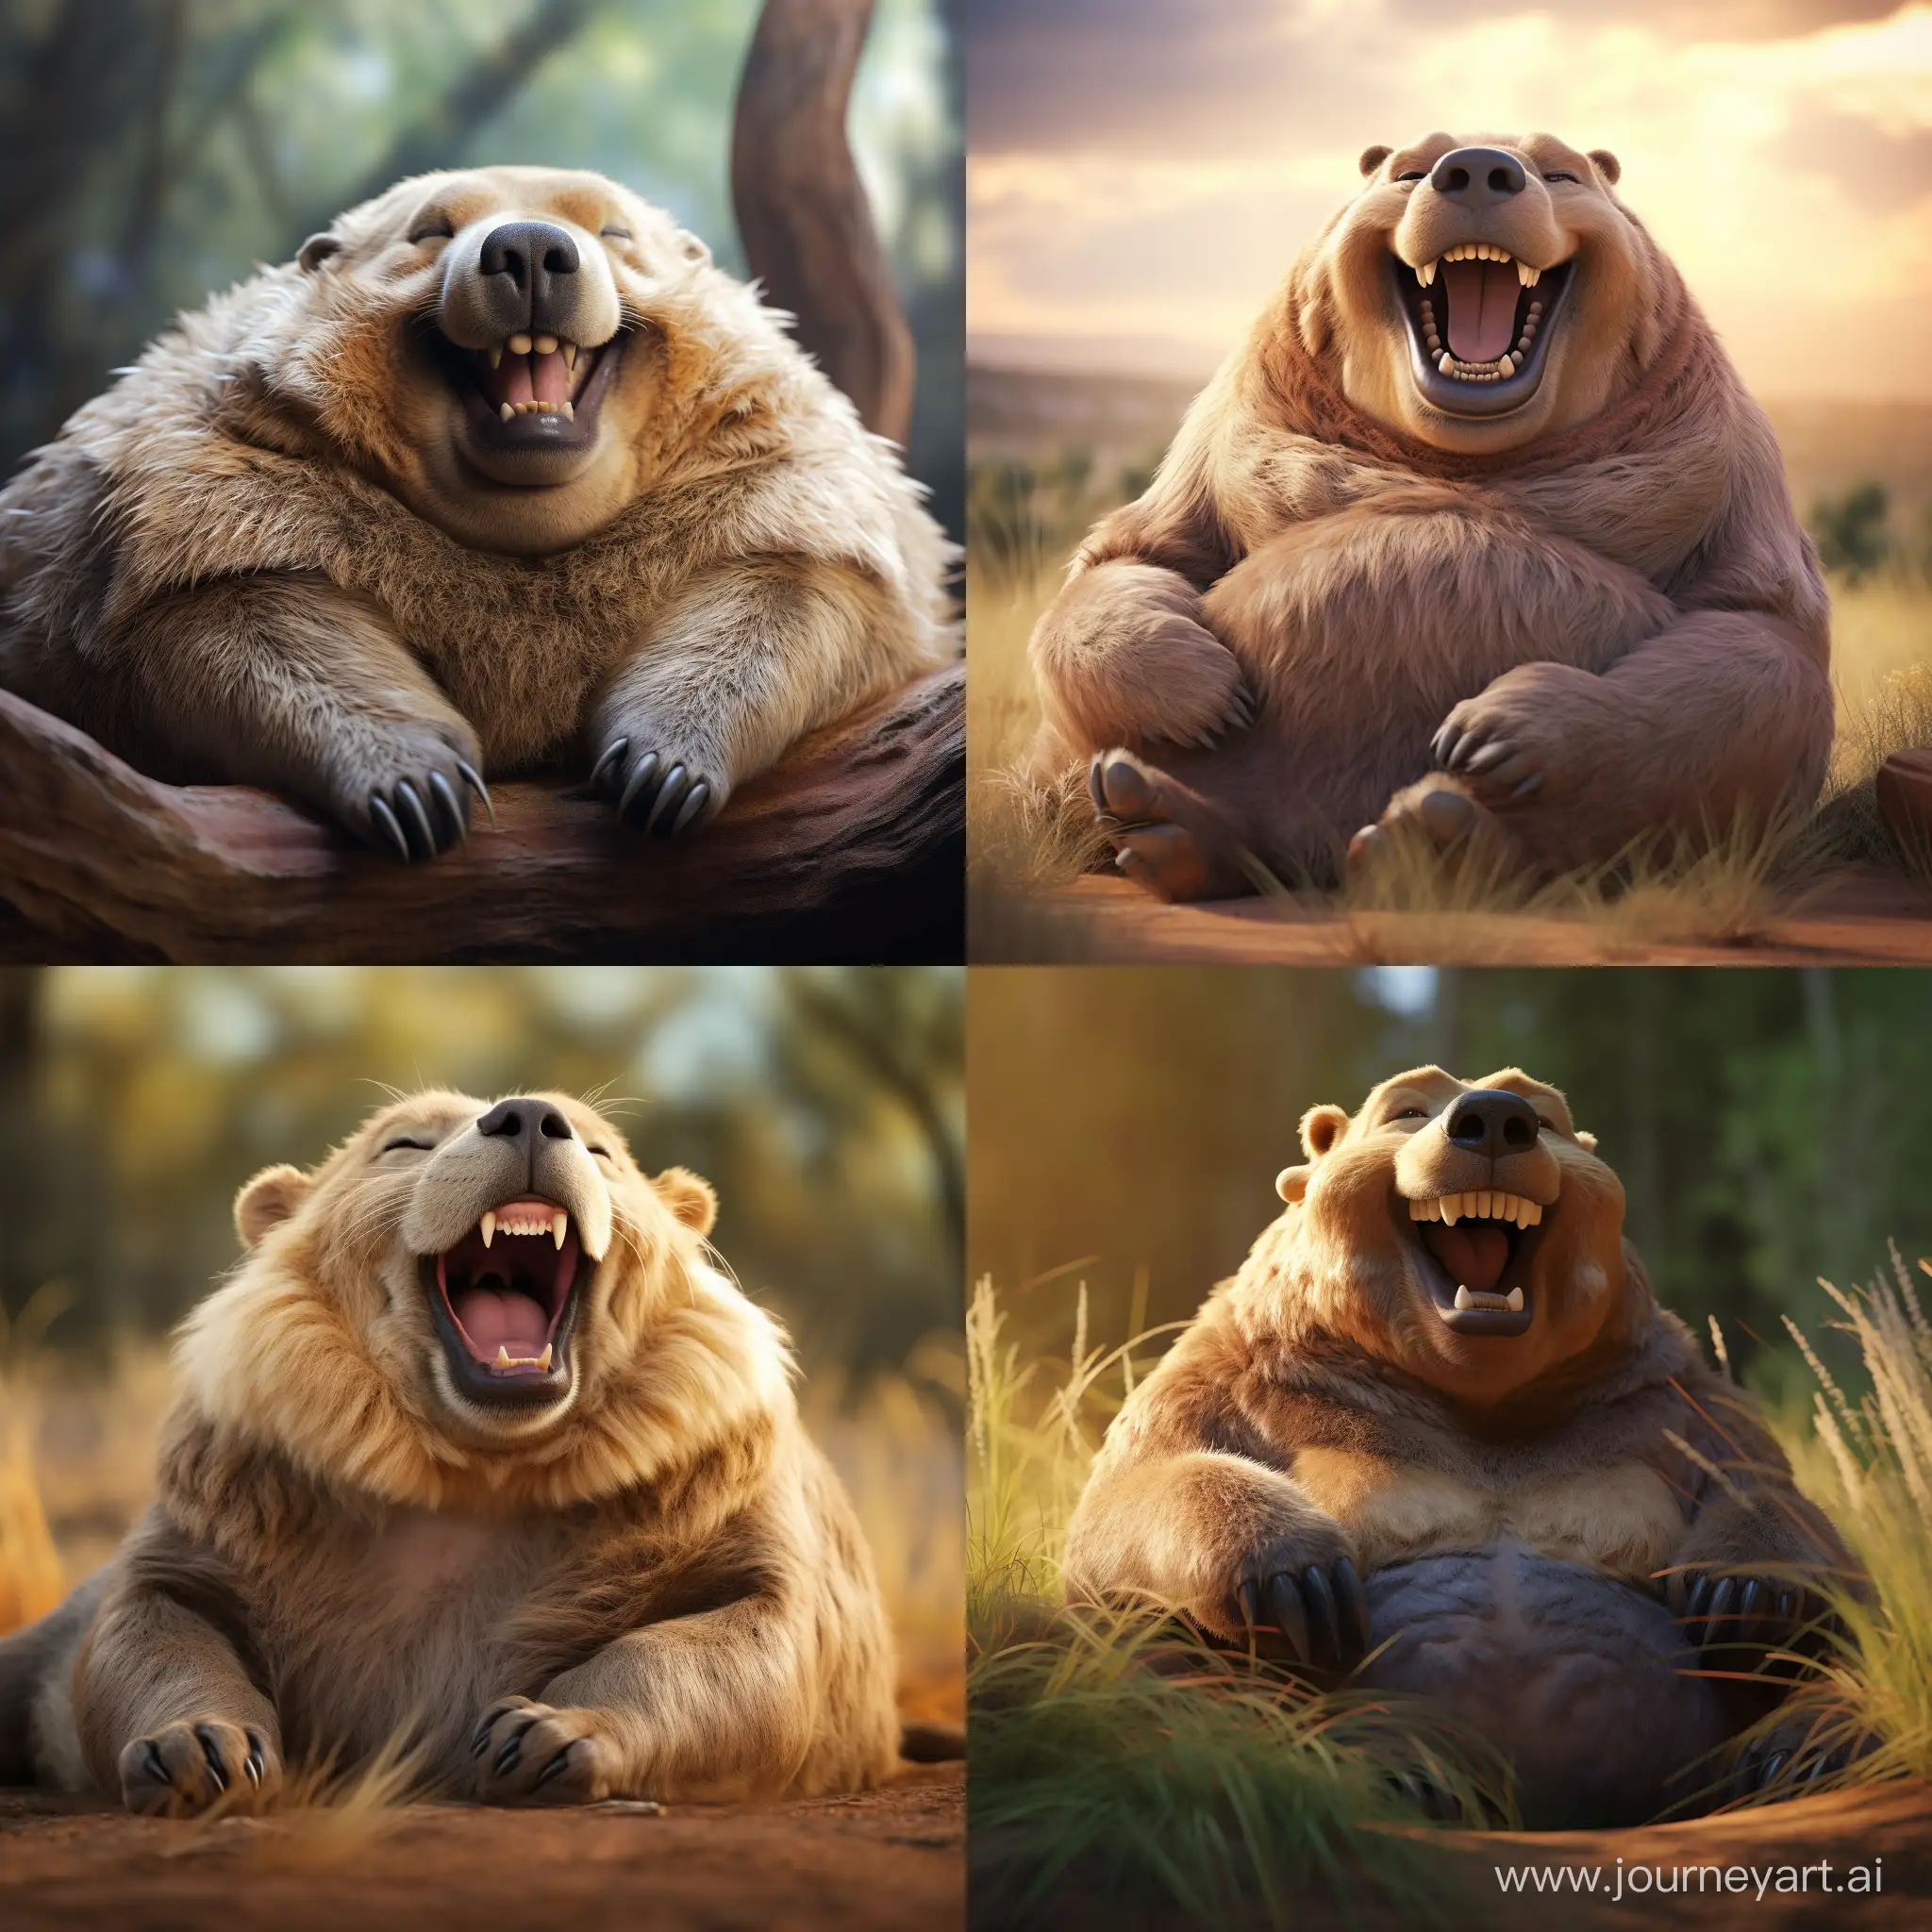 Jovial-Beaver-with-HyenaLike-Laughter-Inspired-by-The-Lion-King